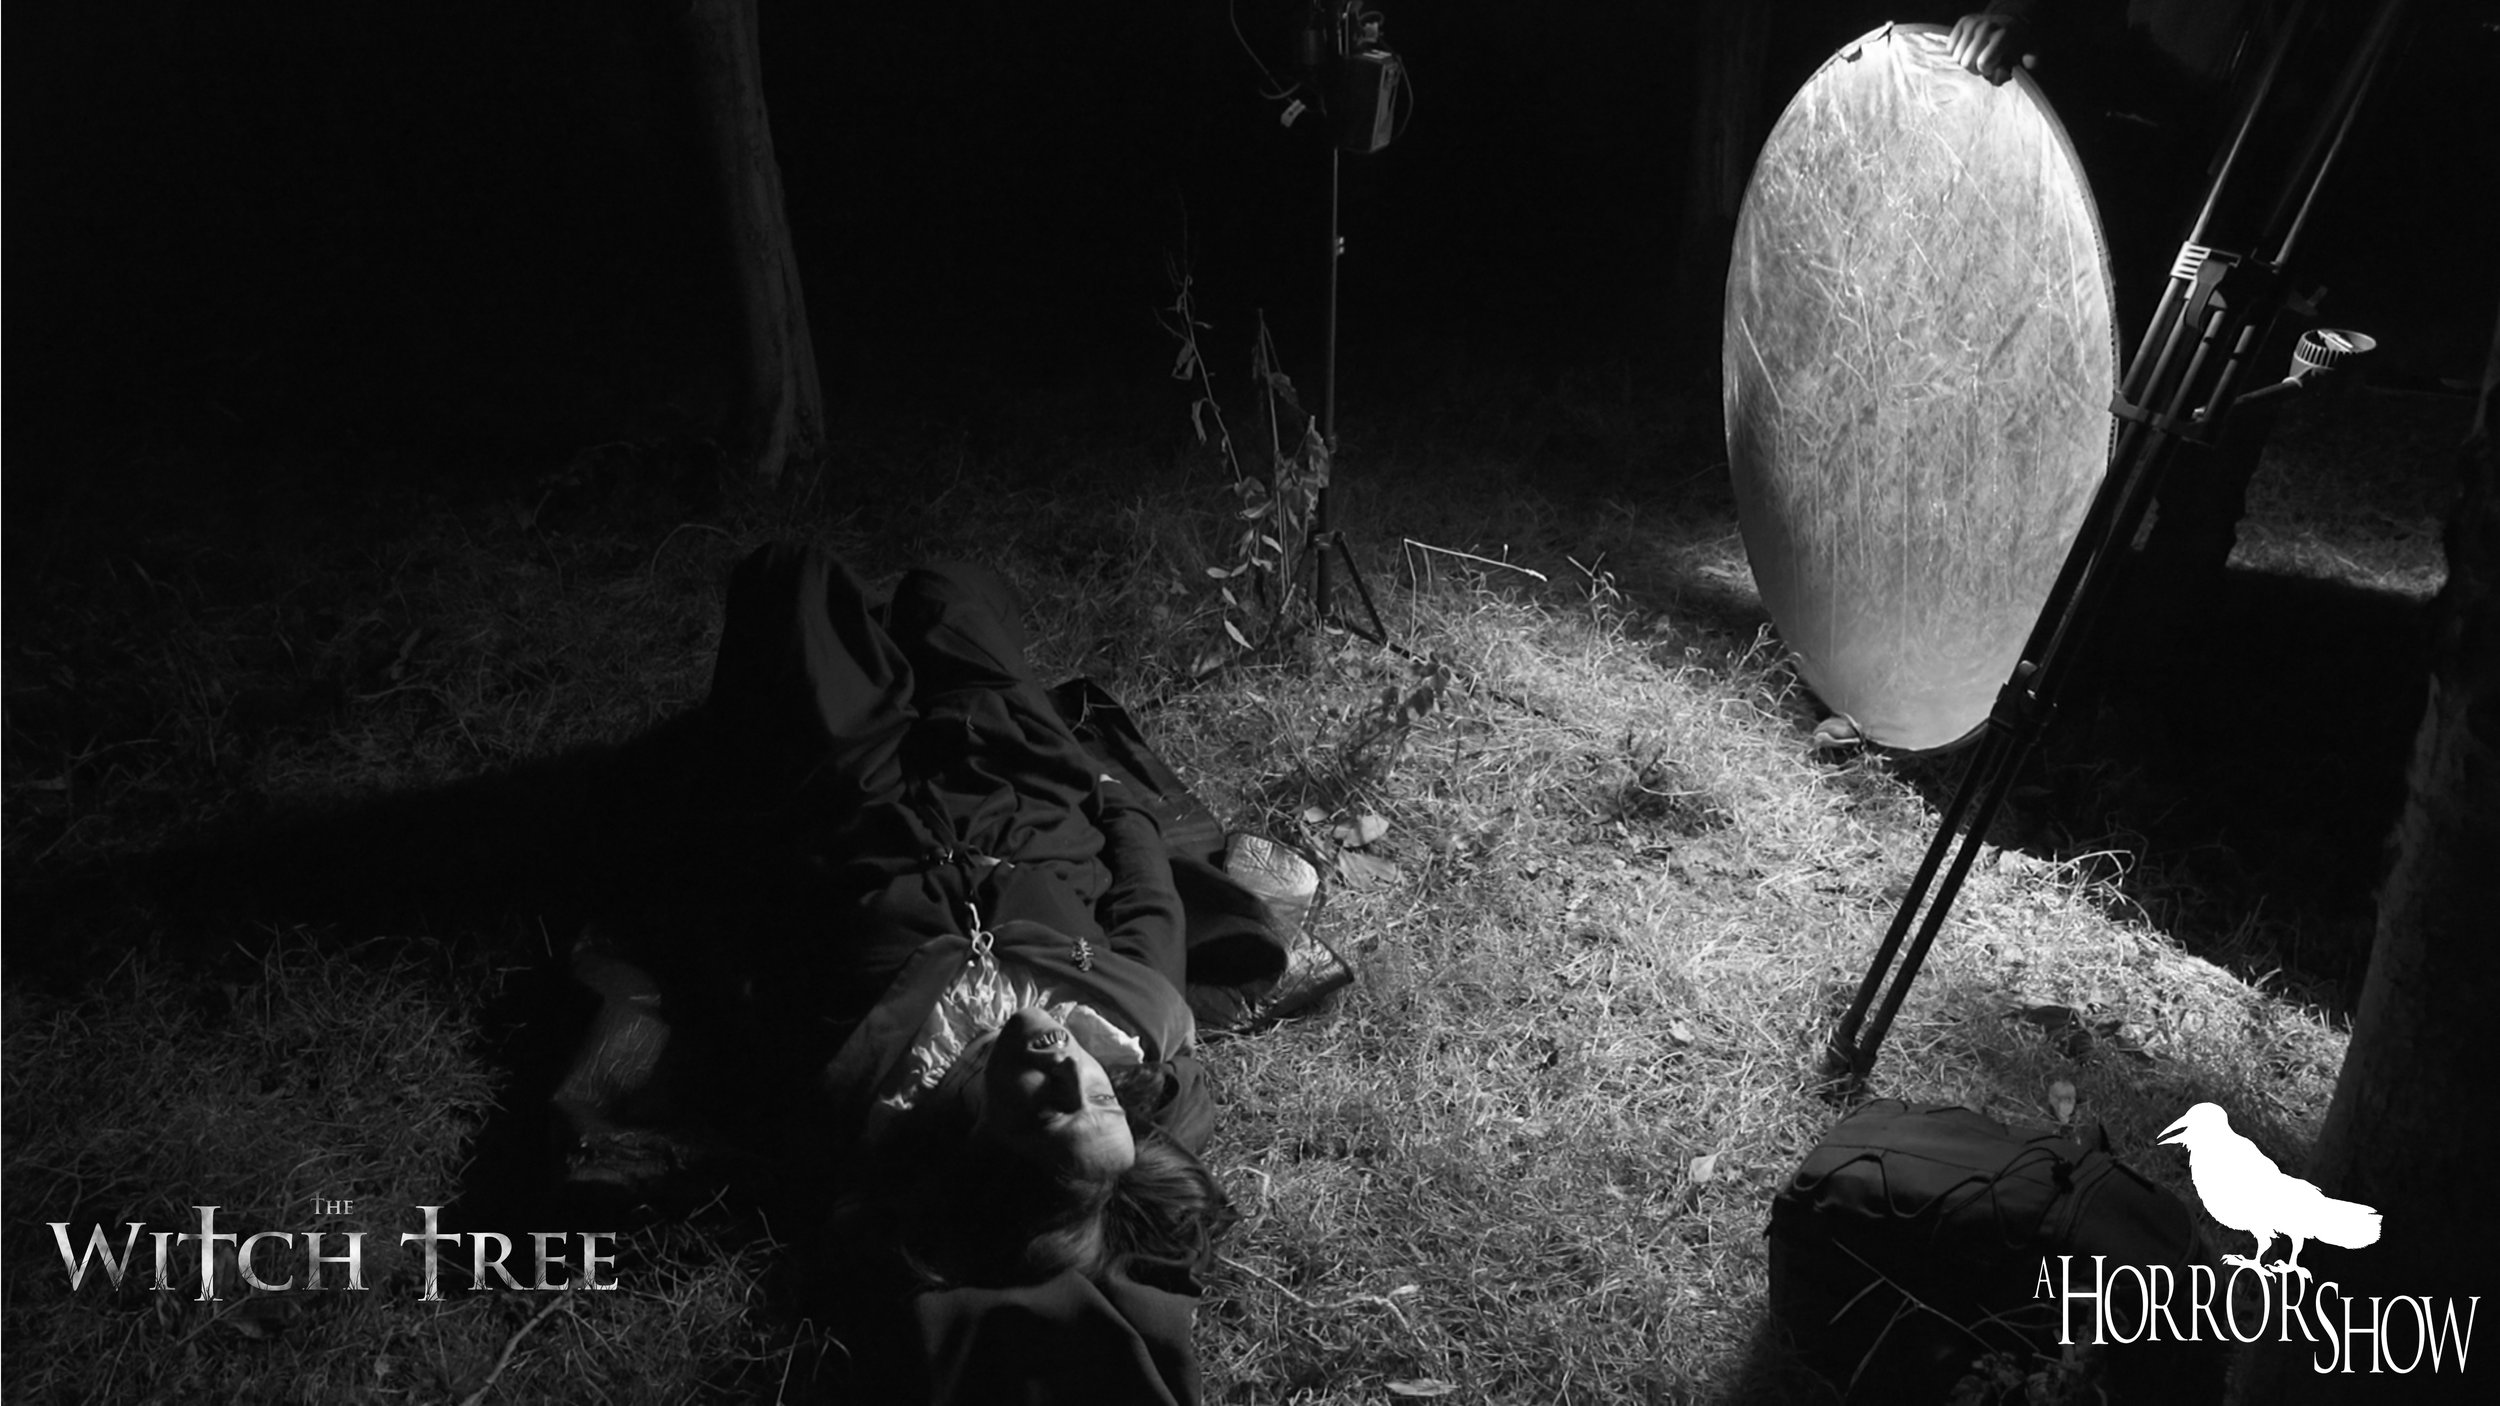  Behind the scenes on the set of The Witch Tree Short horror film. 